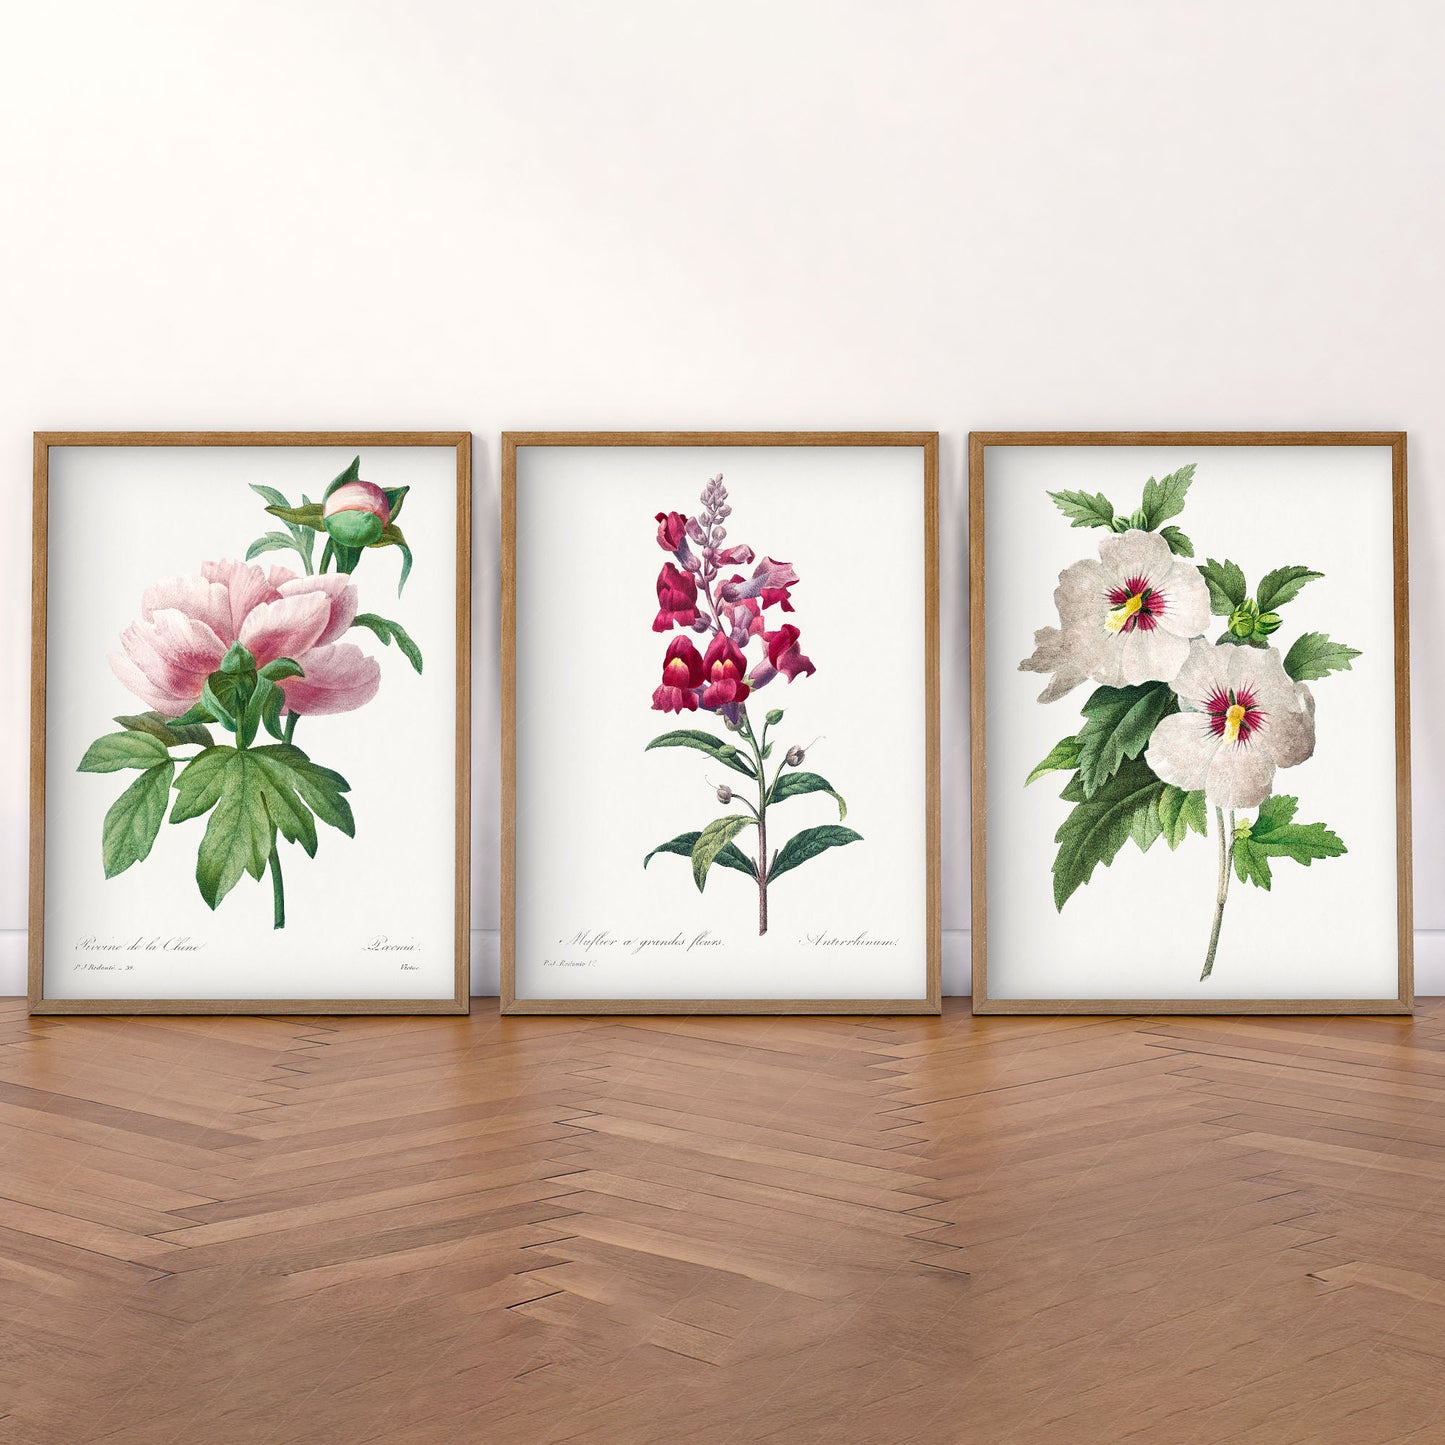 Botanical Gallery Wall Art, Set of 3 Prints, Antique Flowers Paintings 11